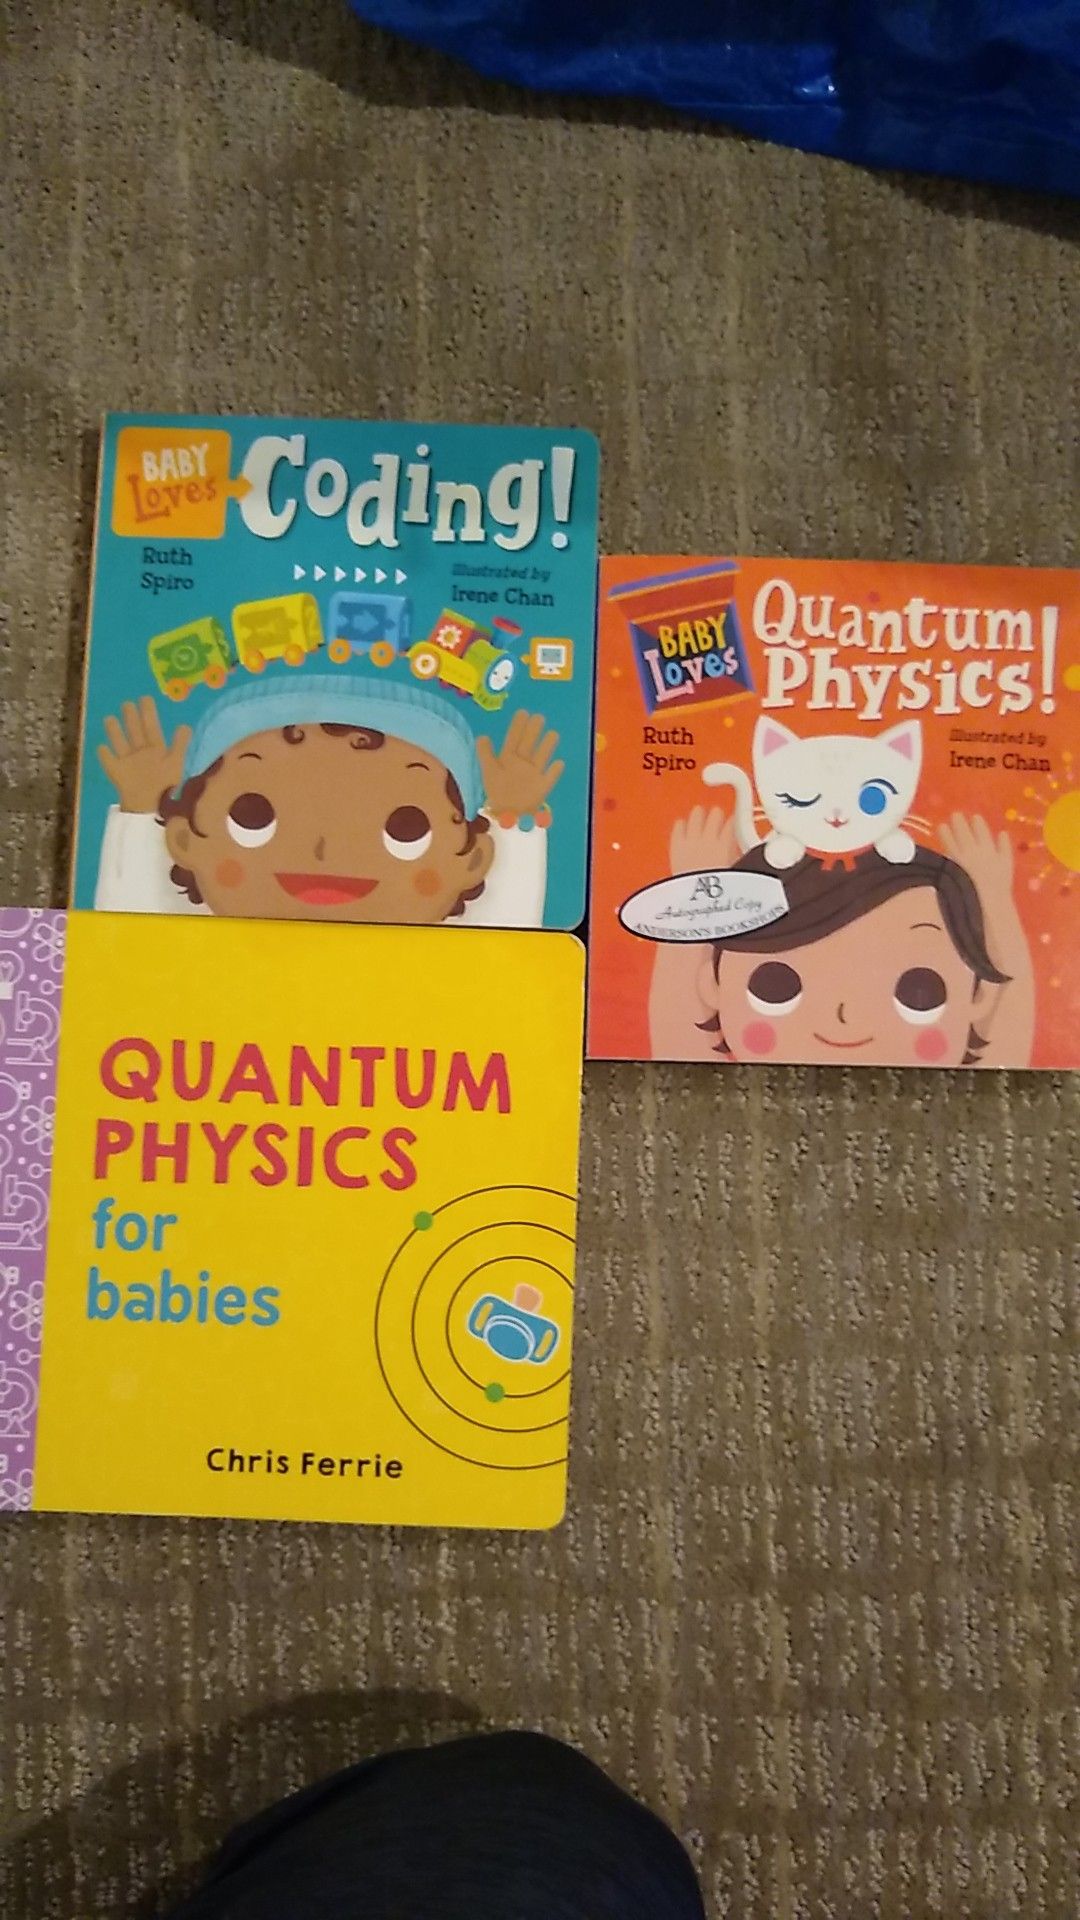 Baby Loves science books by Irene Chan and Chris Ferrie